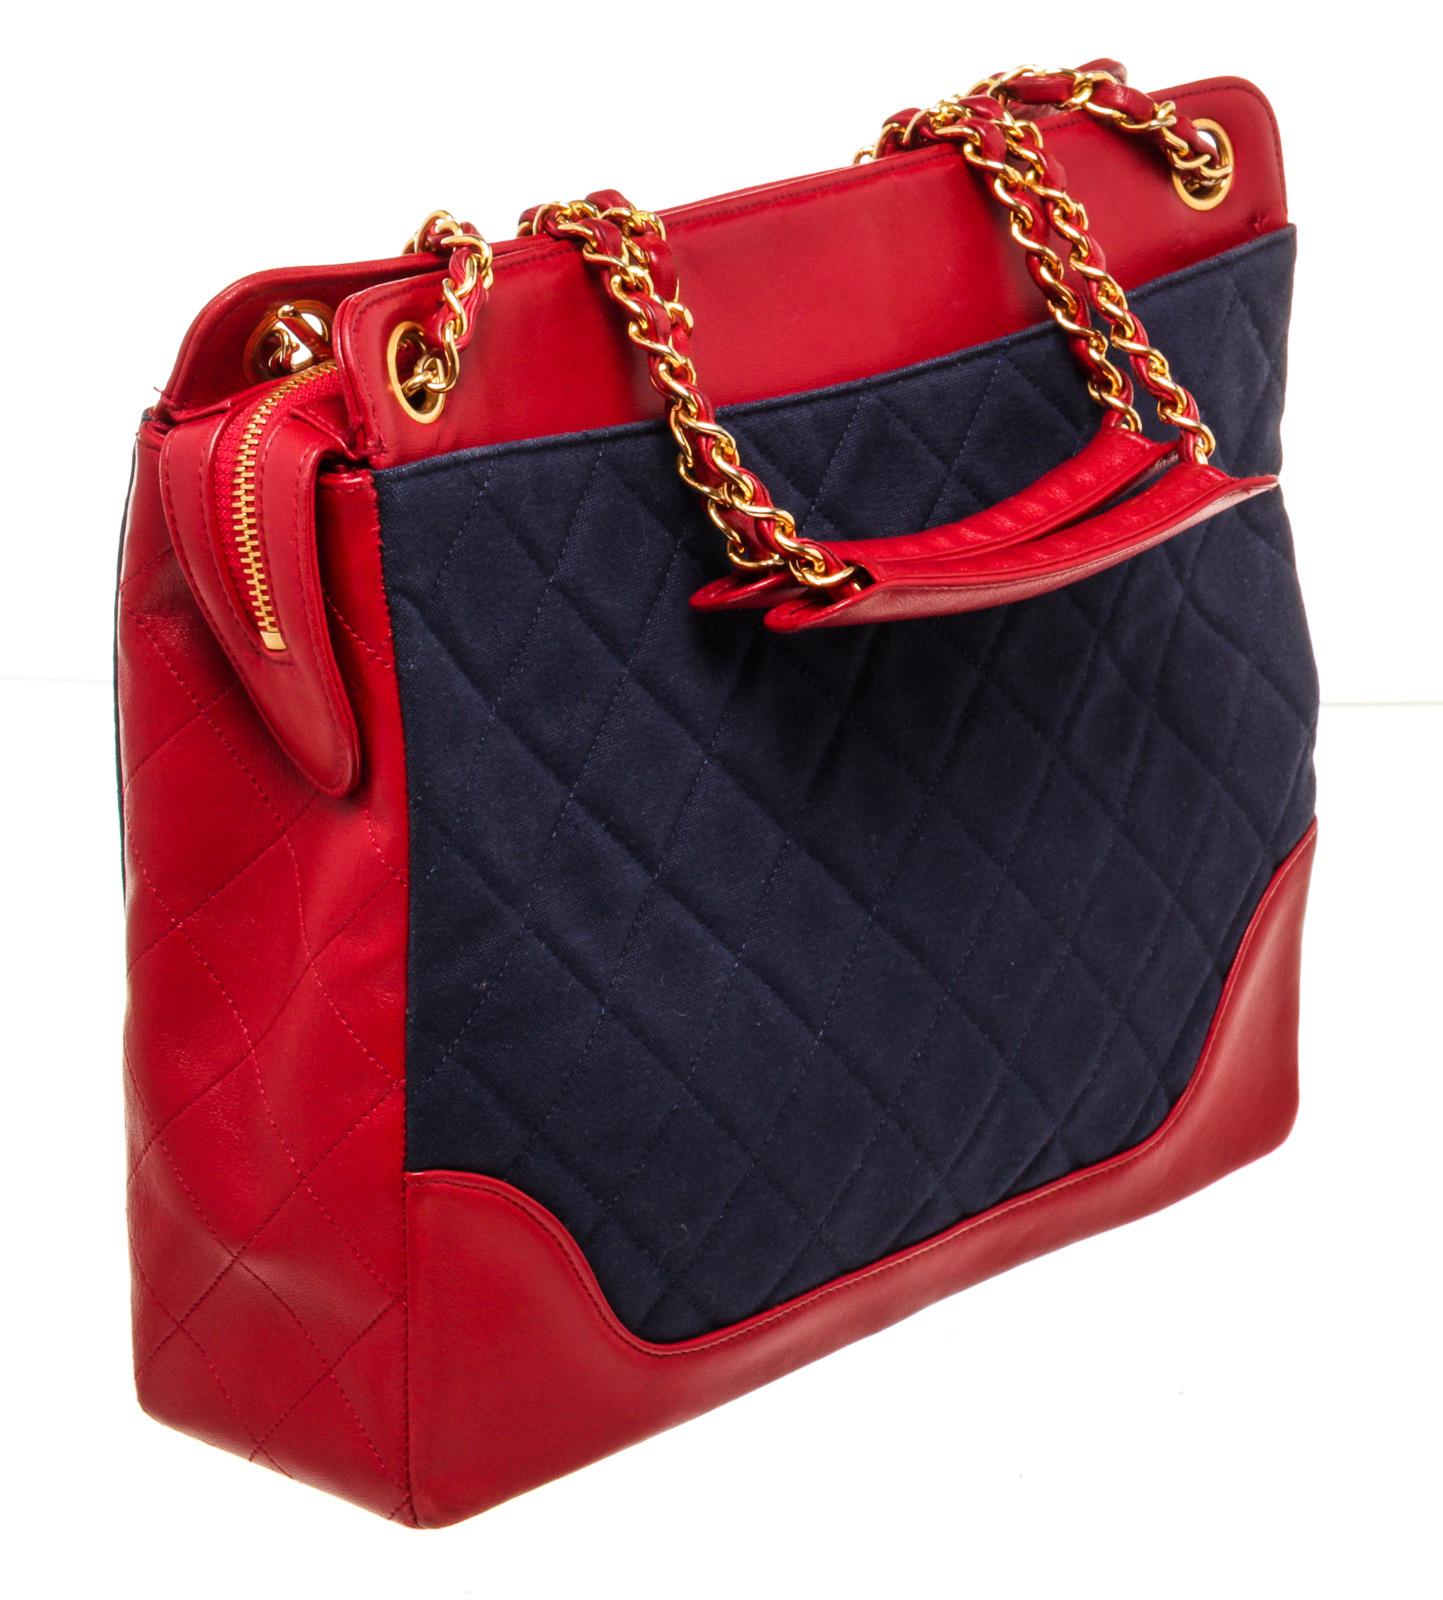 Black Chanel Red Nevy Denim Canvas Chain Tote Bag